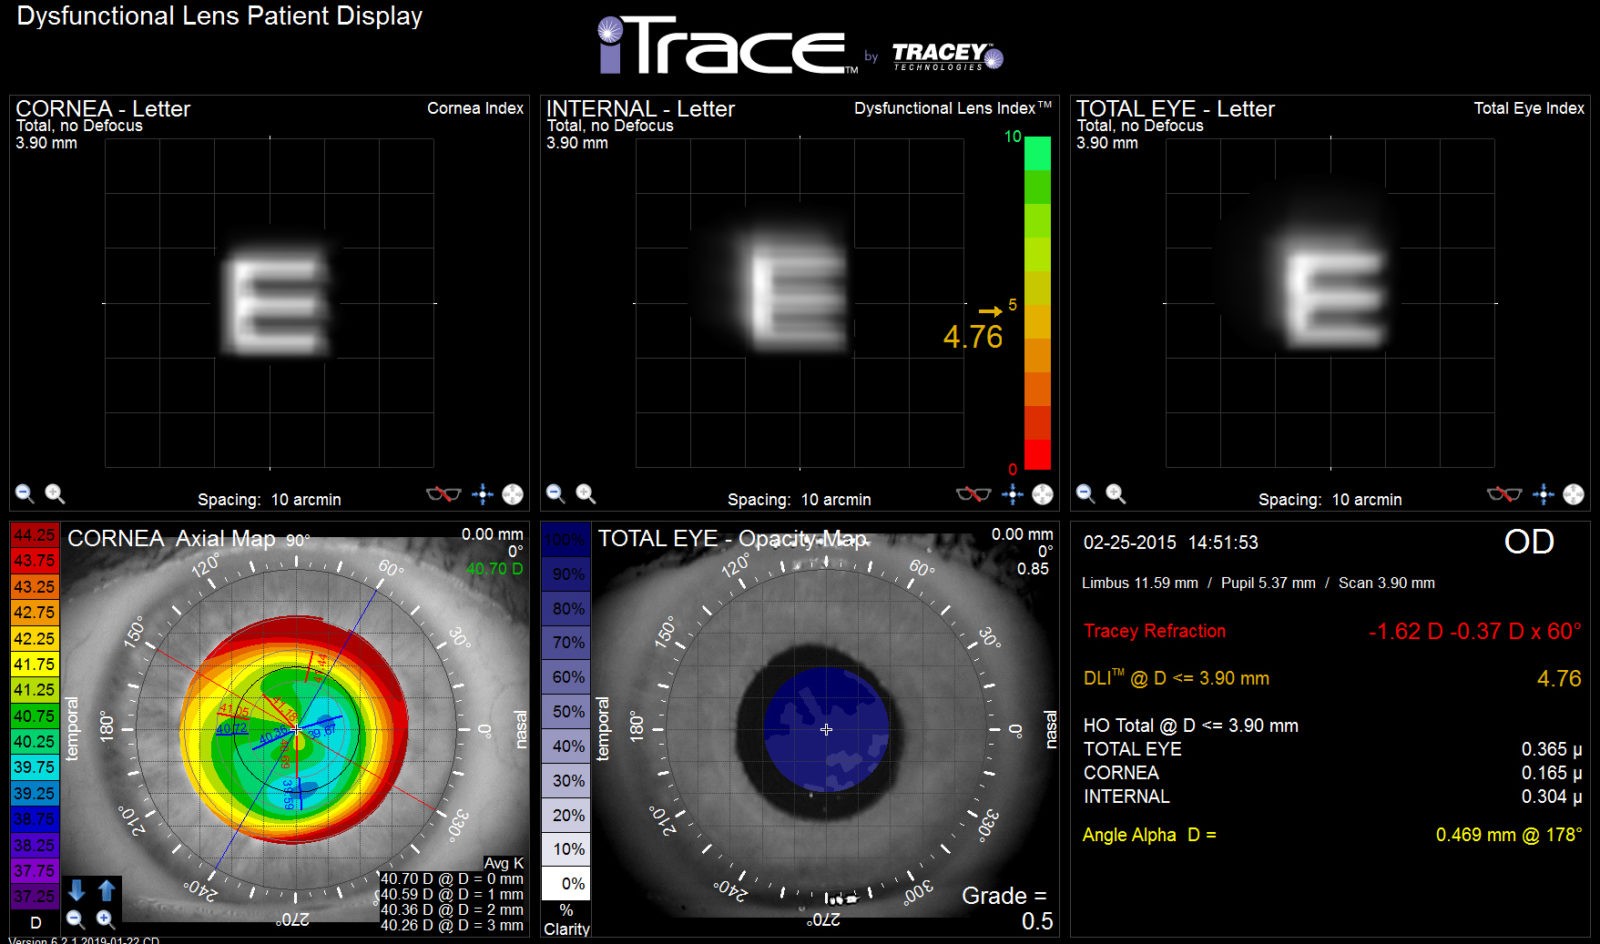 itrace eye scan dysfunctional lens patient display